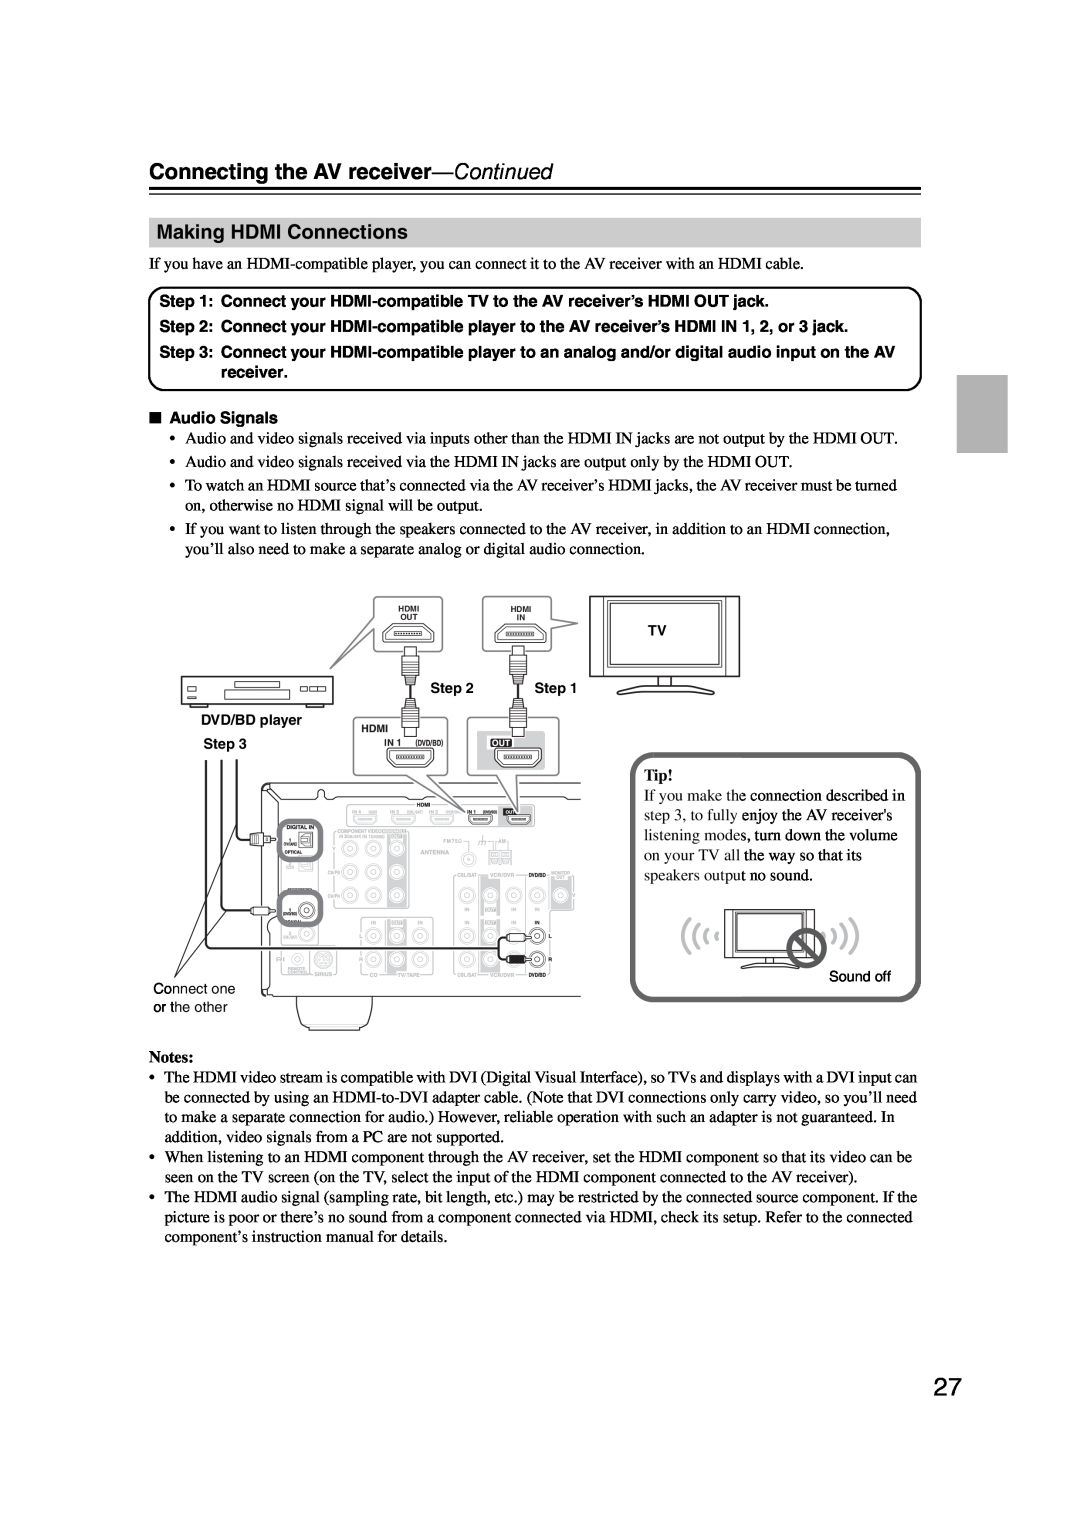 Onkyo 29344934 instruction manual Making HDMI Connections, Connecting the AV receiver—Continued, Notes 